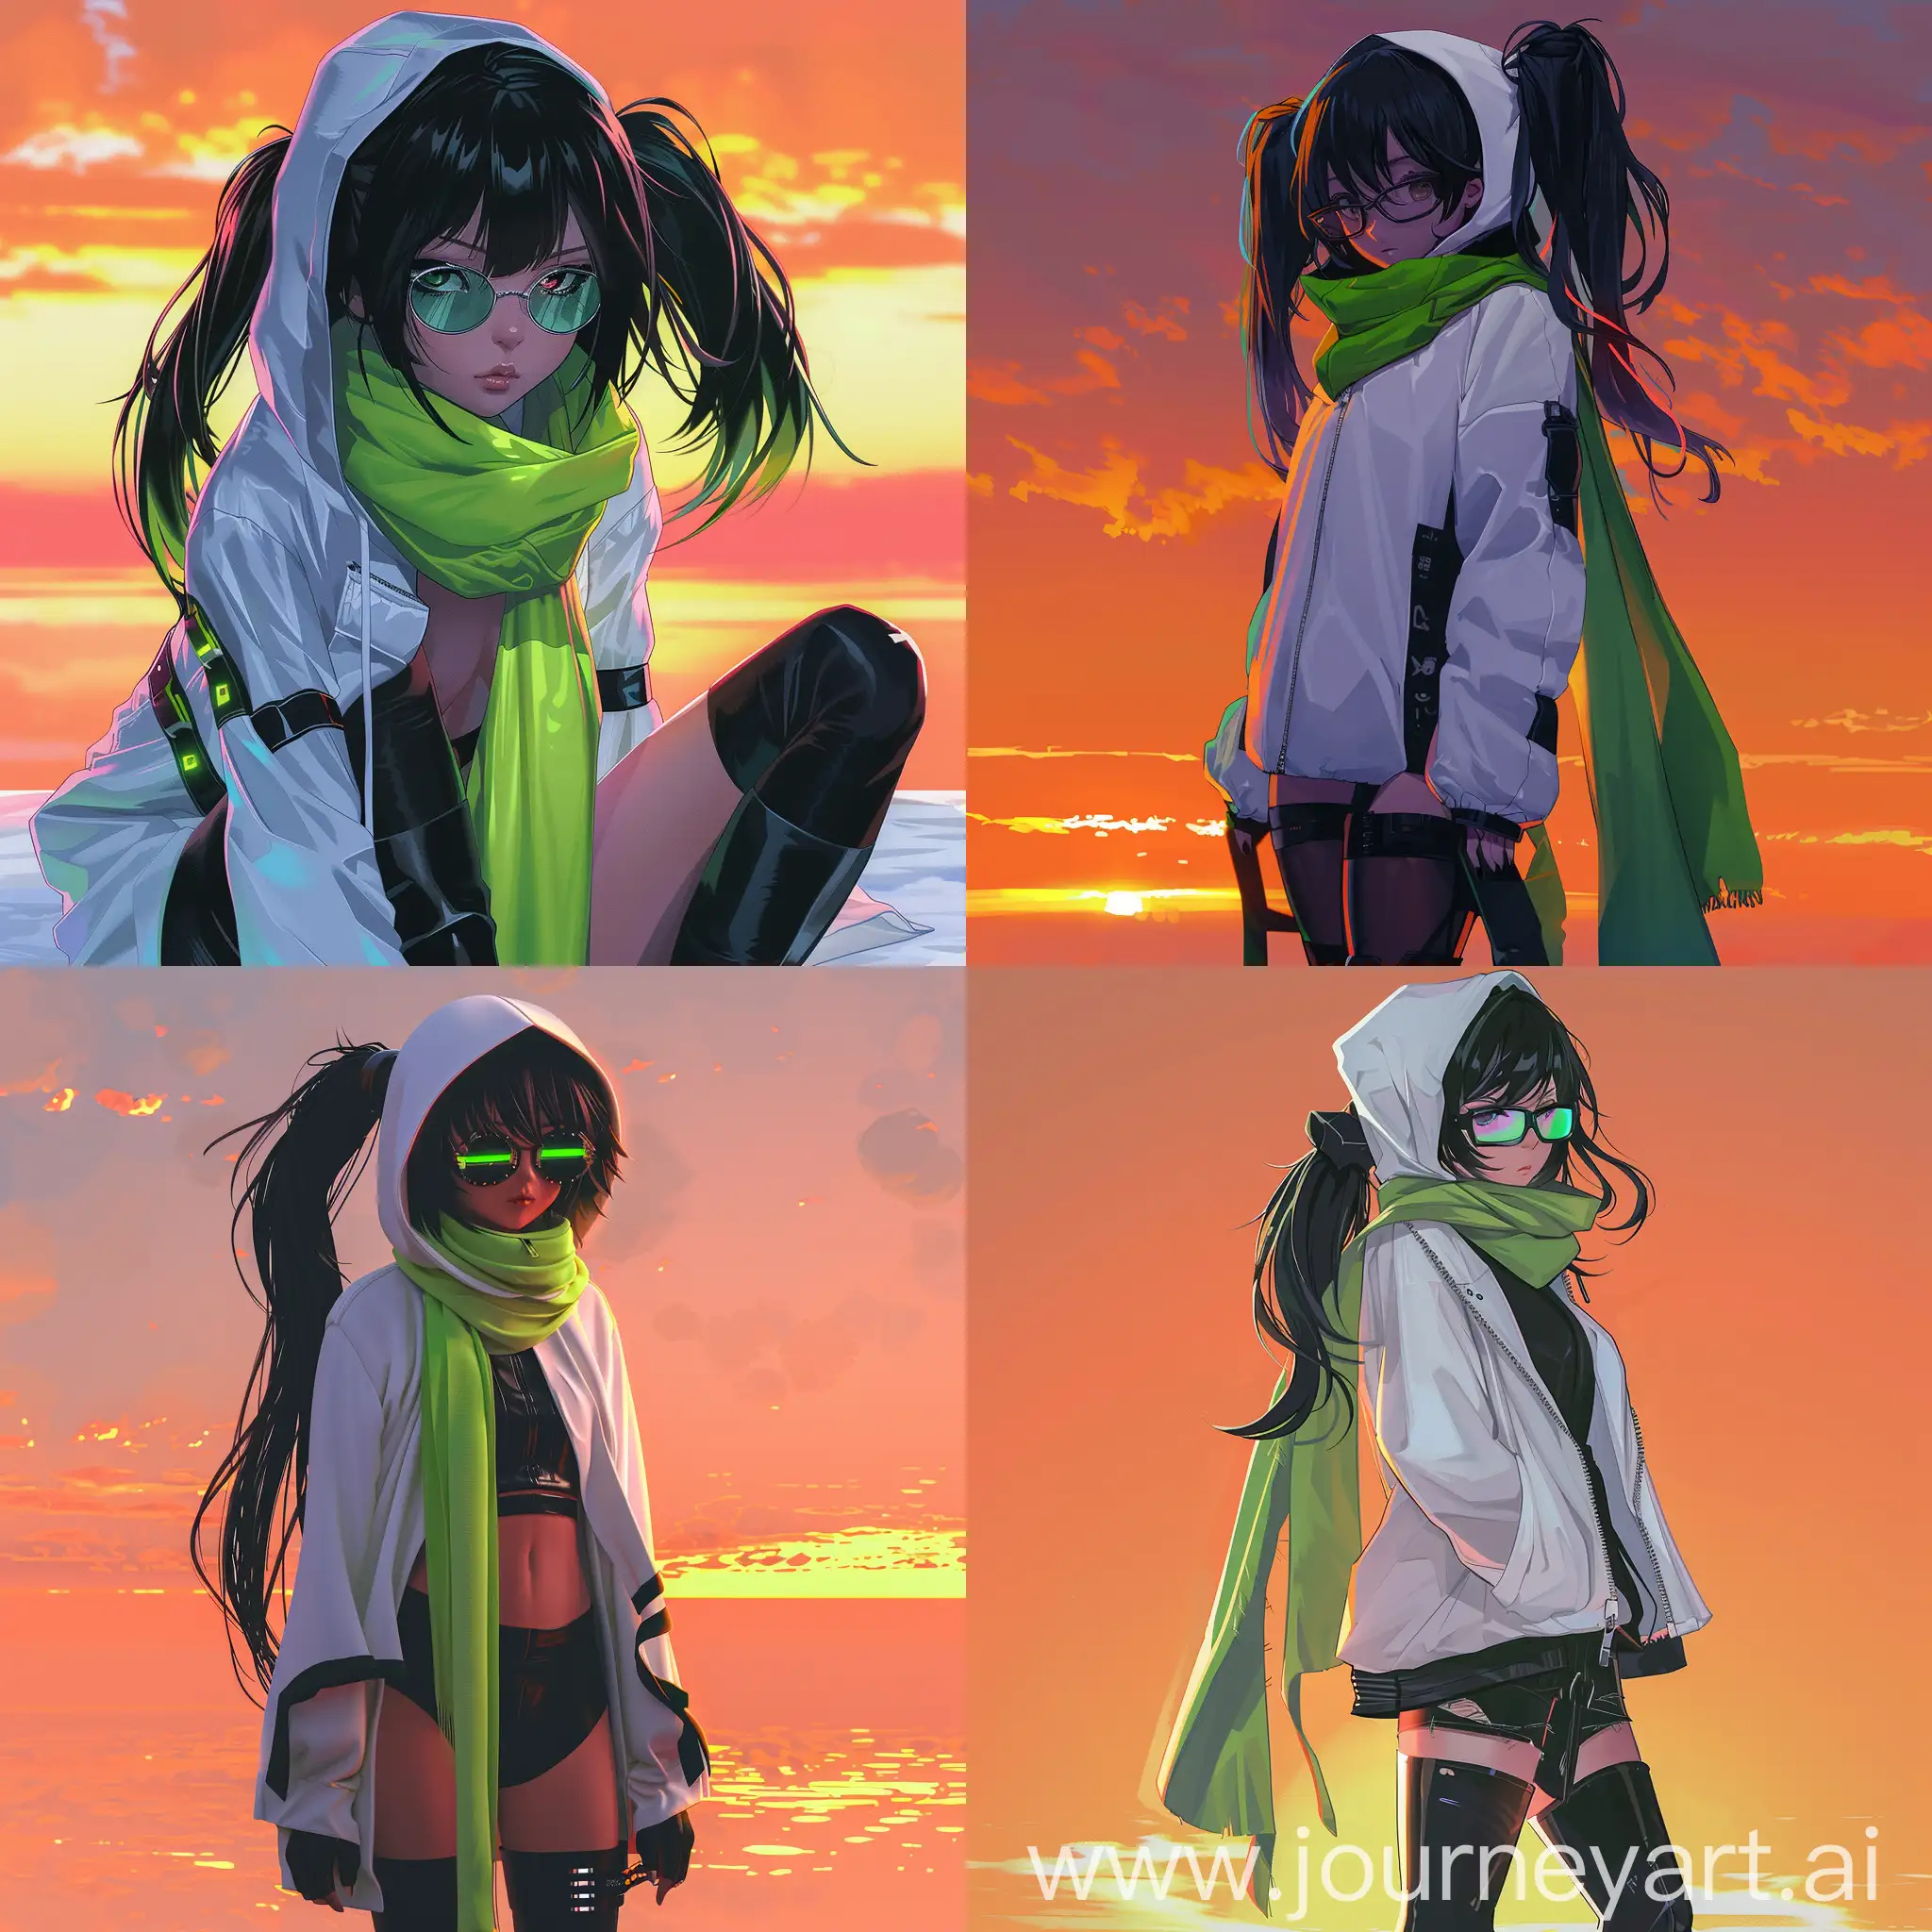 The picture shows a beautiful girl wearing a white hooded jacket and black leggins. The character is wearing a green scarf that partially covers the lower part of his face. The background is neon sunset, creating a comfortable retro atmosphere. make anime girl. very detailed illustration, 8K. full body, boots, add milieu glasses that emphasise her stern look. Black hairs in ponytails